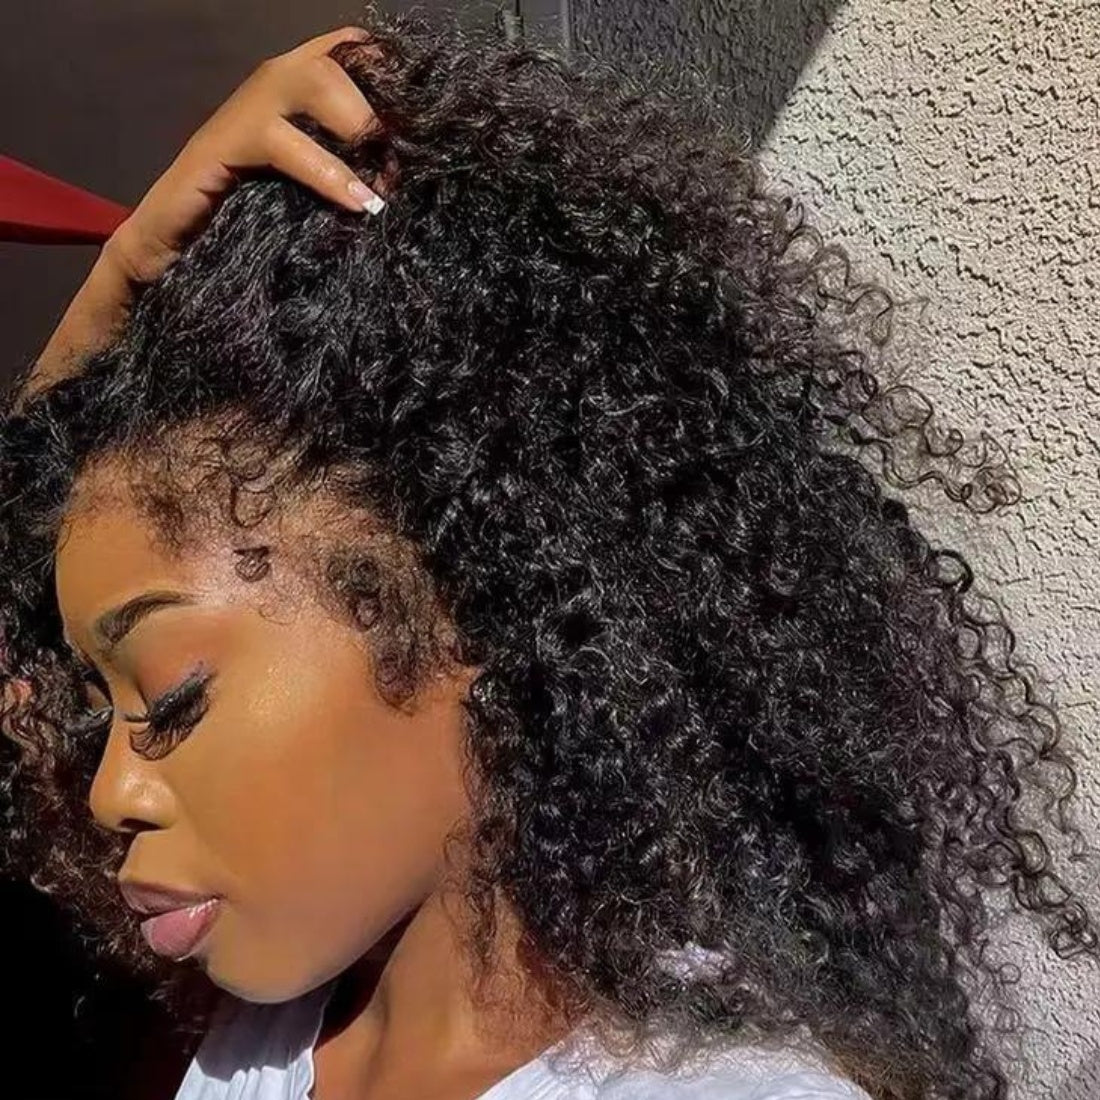 4C Kinky Edge Natural Hairline Wig - 13x4 Kinky Curly Undetectable Lace Frontal Wig - Seyna Hair